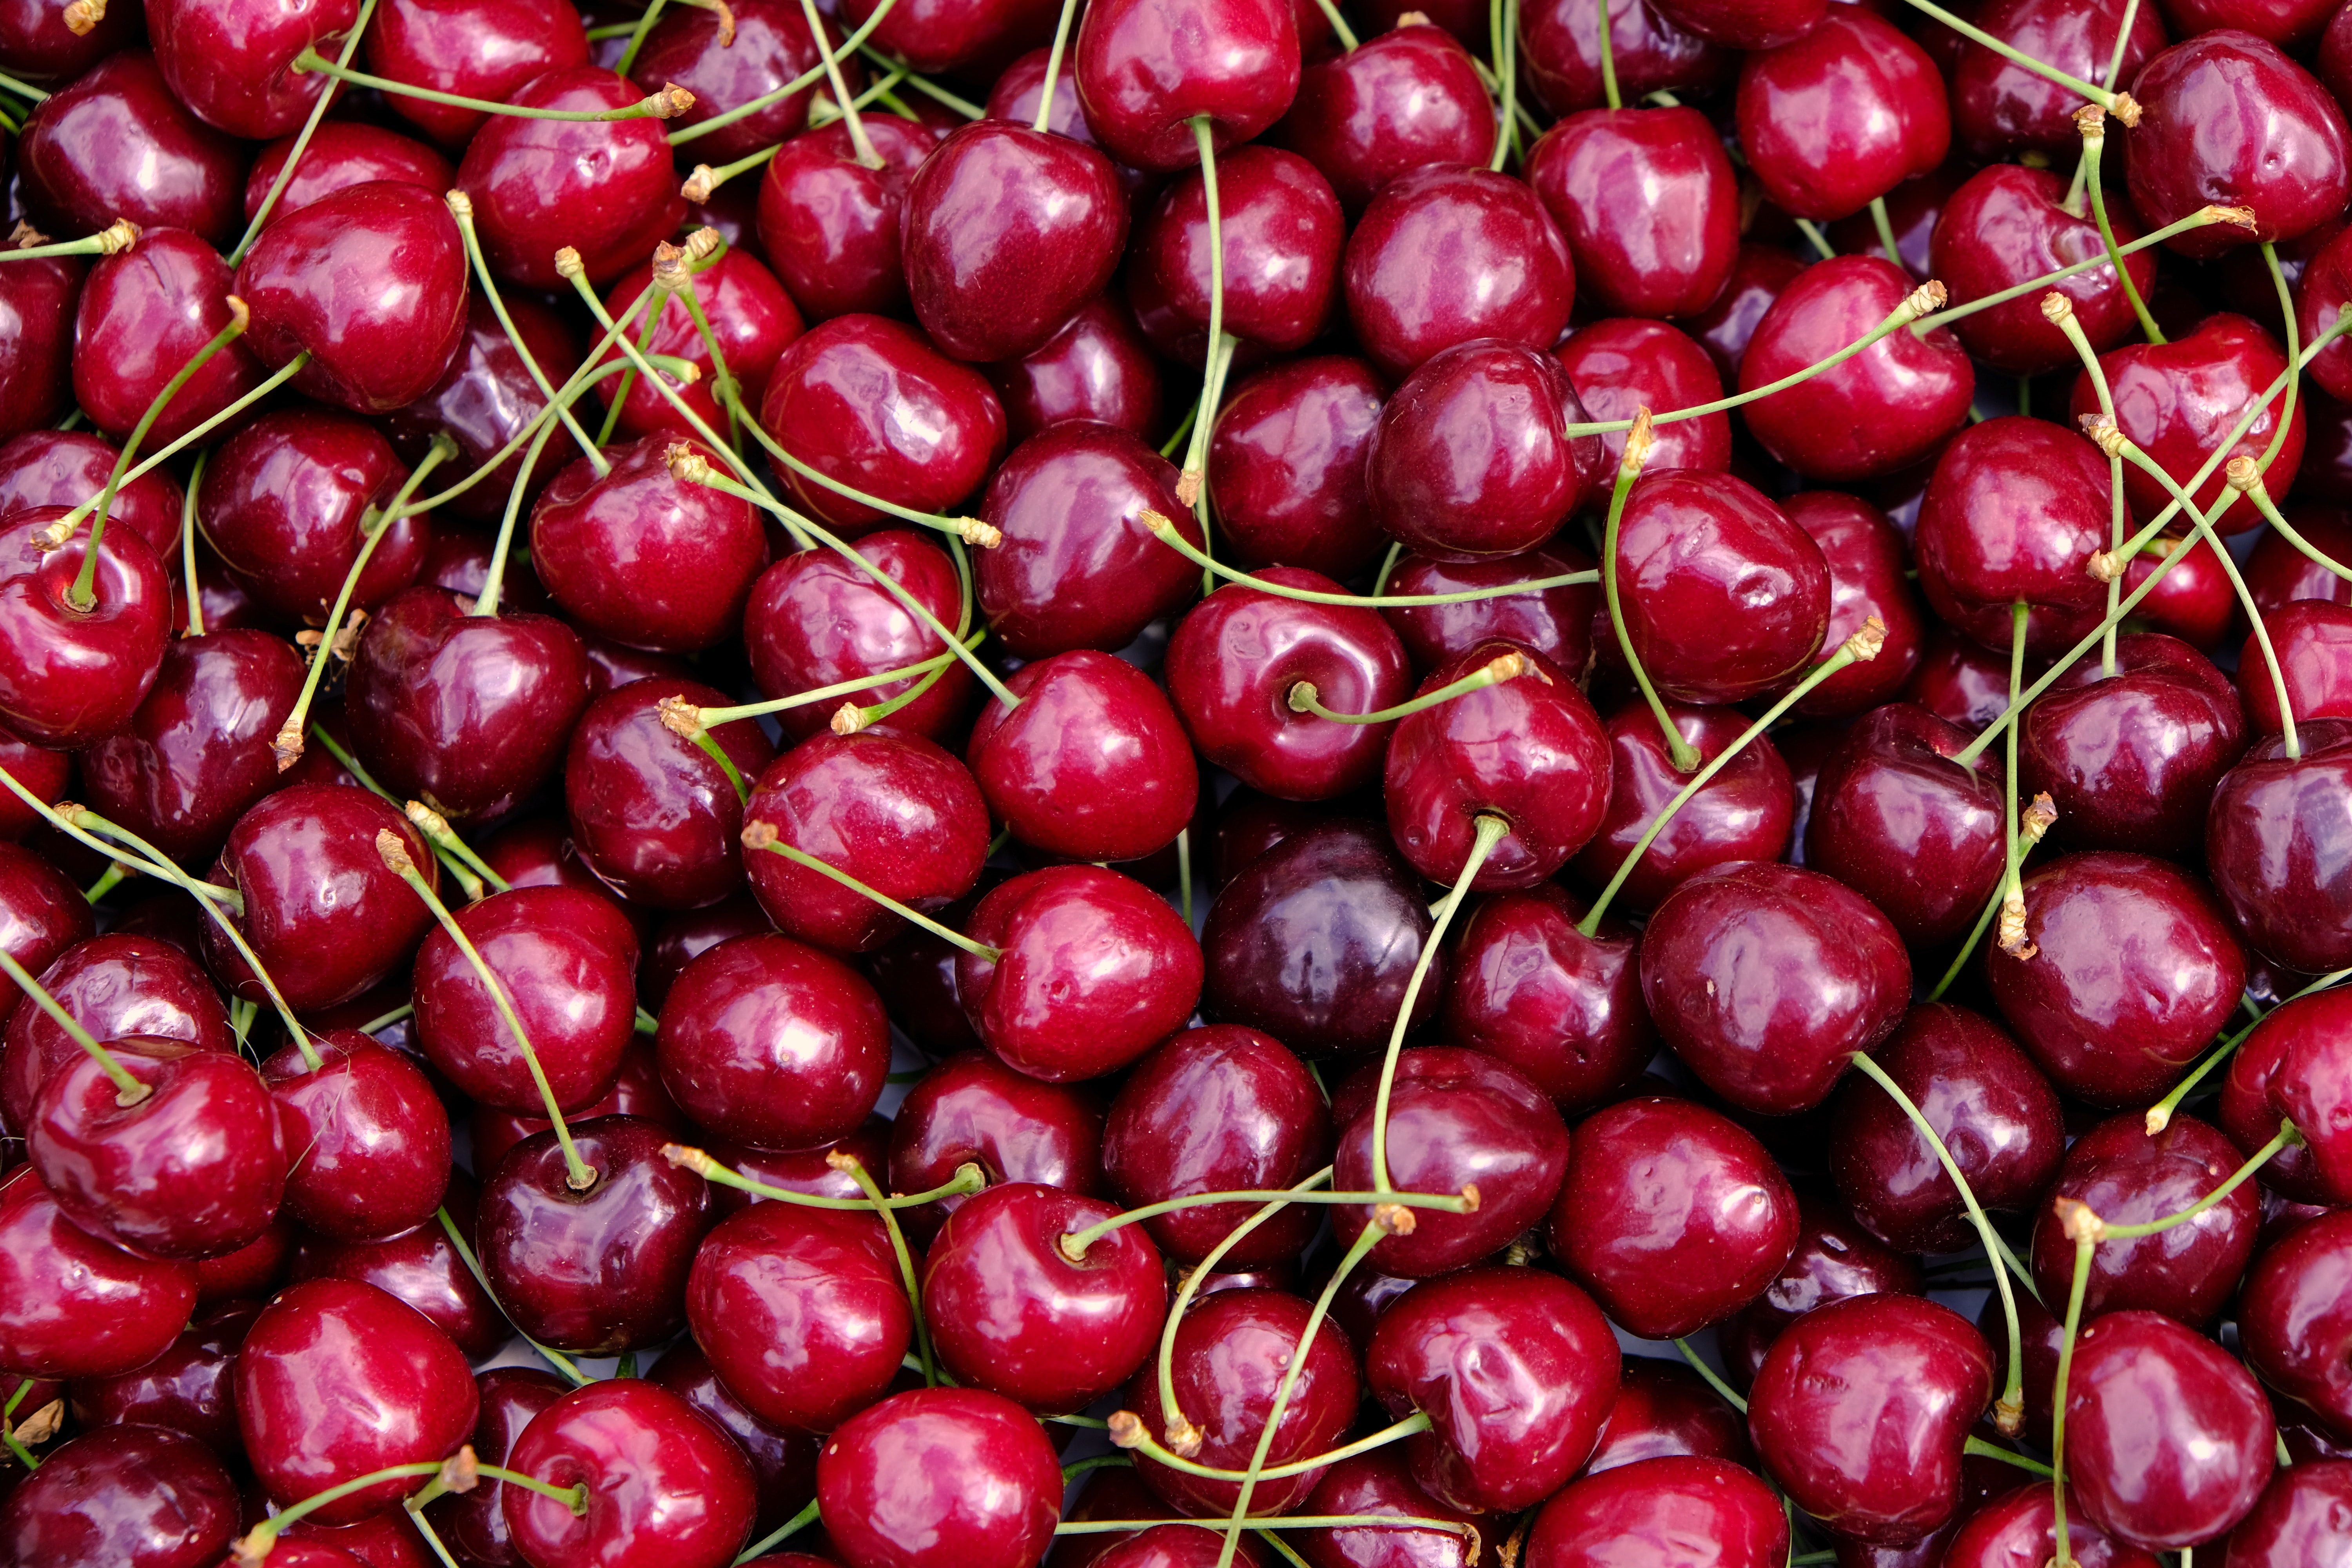 53860 download wallpaper ripe, food, red, fruit, cherries screensavers and pictures for free